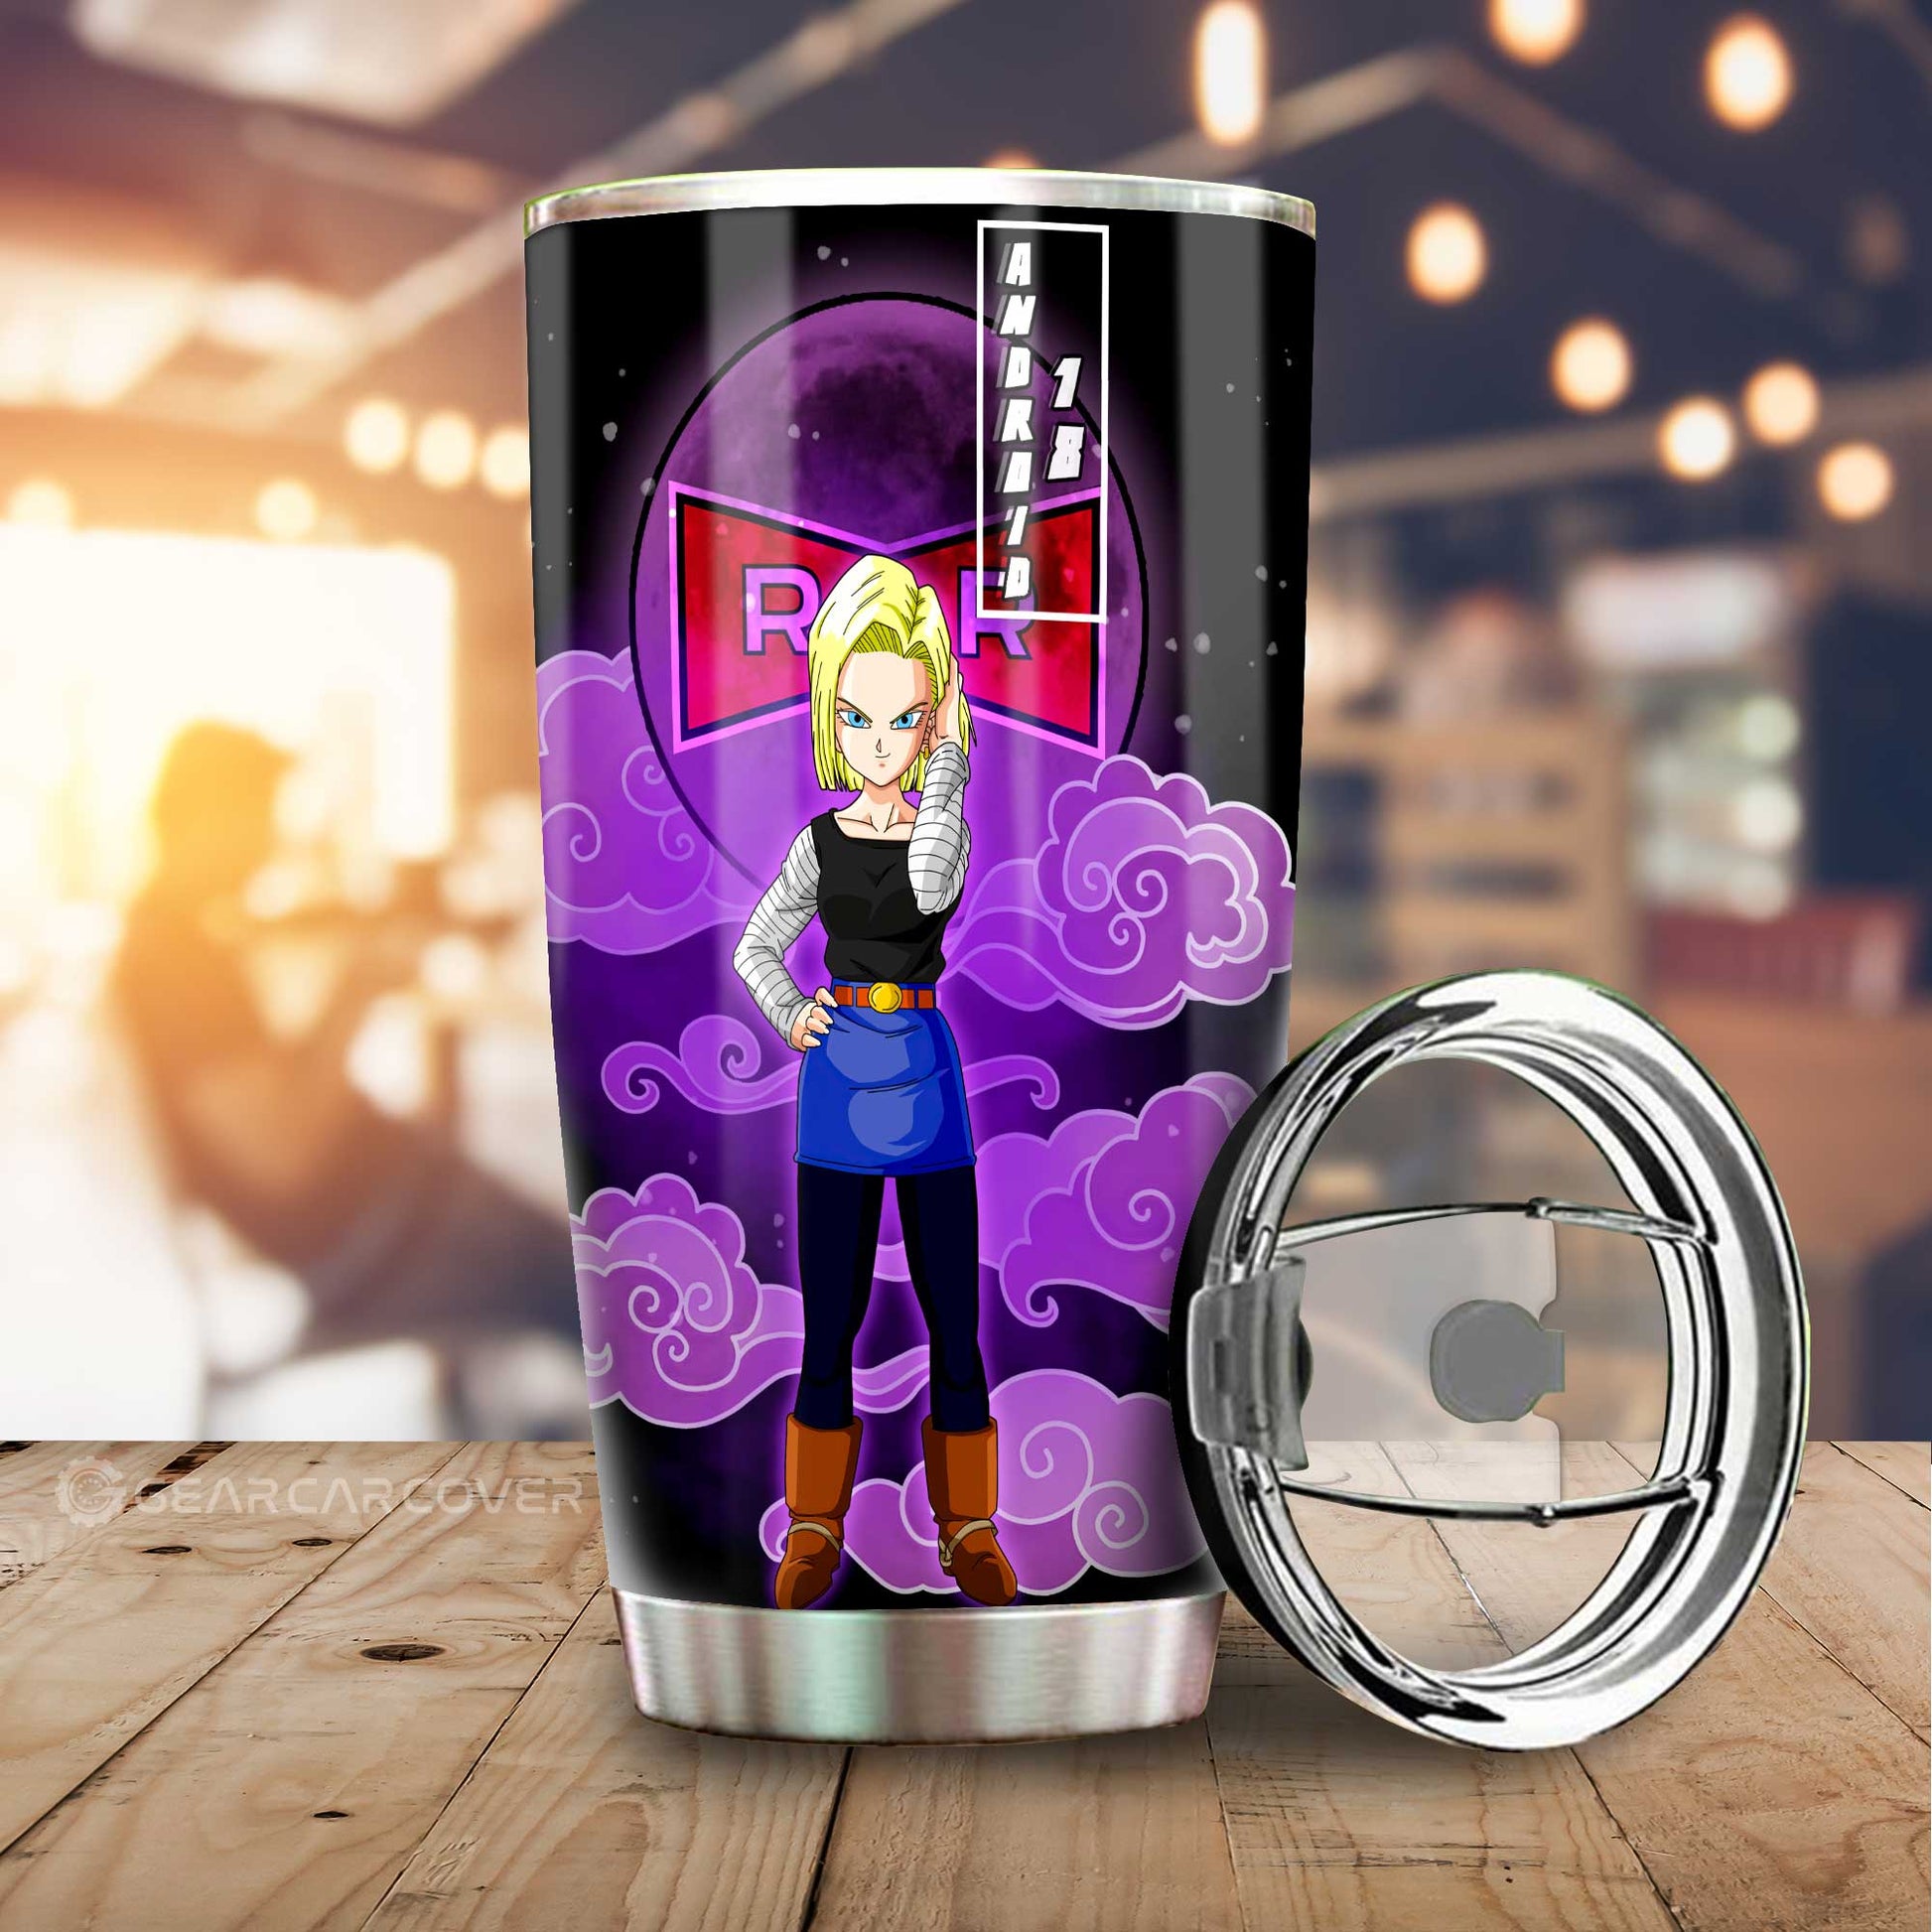 Krillin And Android 18 Tumbler Cup Custom Dragon Ball Anime Car Accessories - Gearcarcover - 2